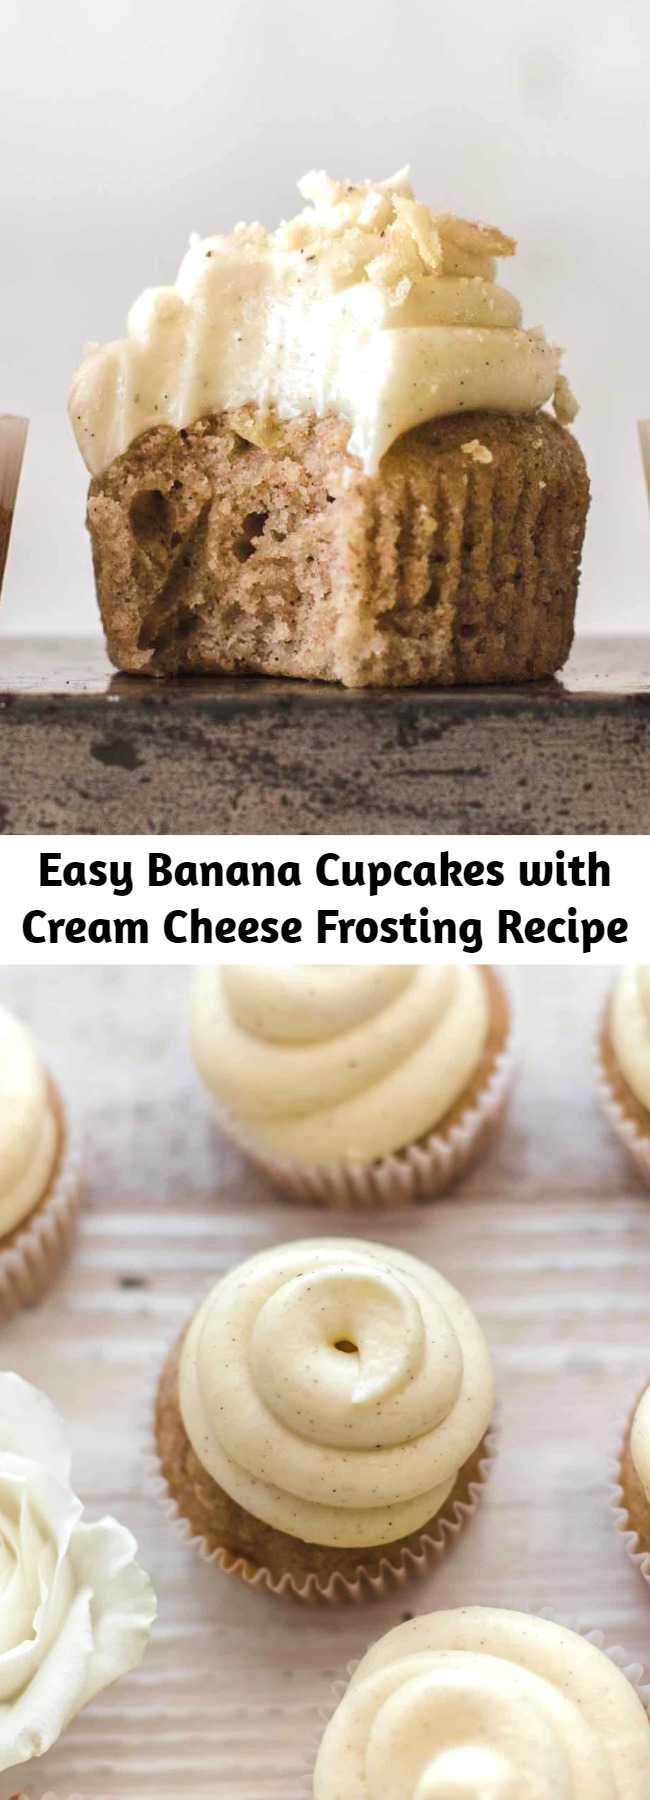 This super delicious Banana Cupcakes with Cream Cheese Frosting recipe is very easy to make. Made from scratch with fresh bananas. Soft, moist, and creamy. #cupcakes #creamcheese #frosting #banana #bananacupcakes #creamcheesefrosting #baking #recipeoftheday